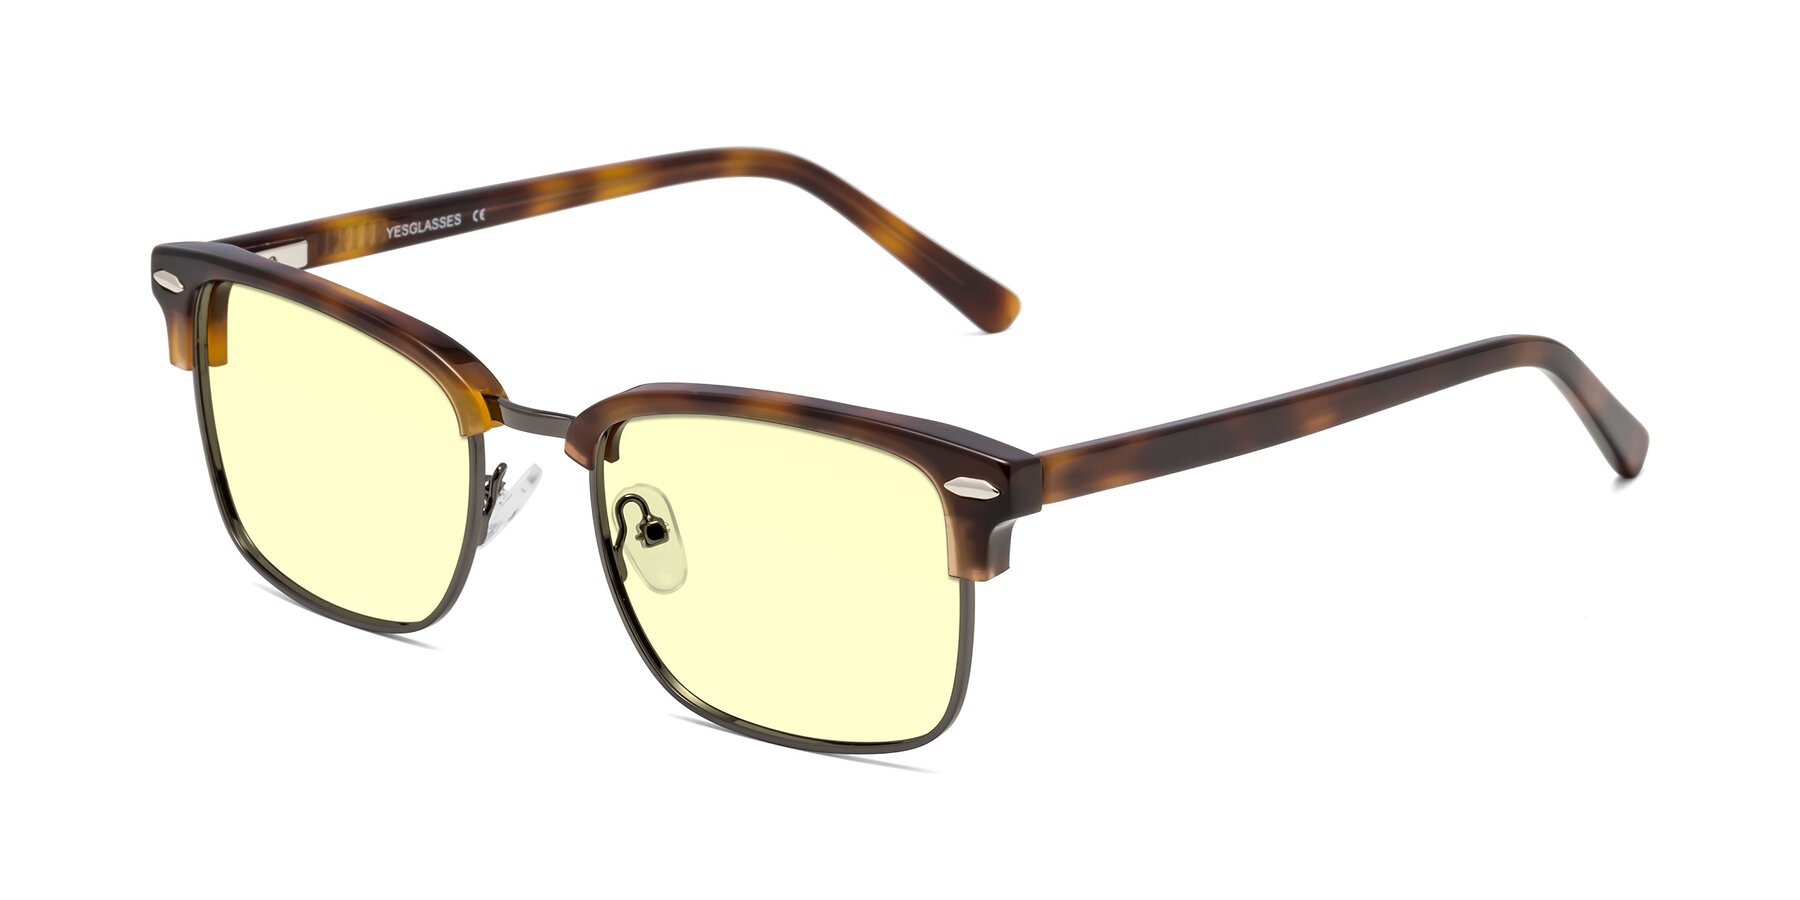 Angle of 17464 in Tortoise/ Gunmetal with Light Yellow Tinted Lenses